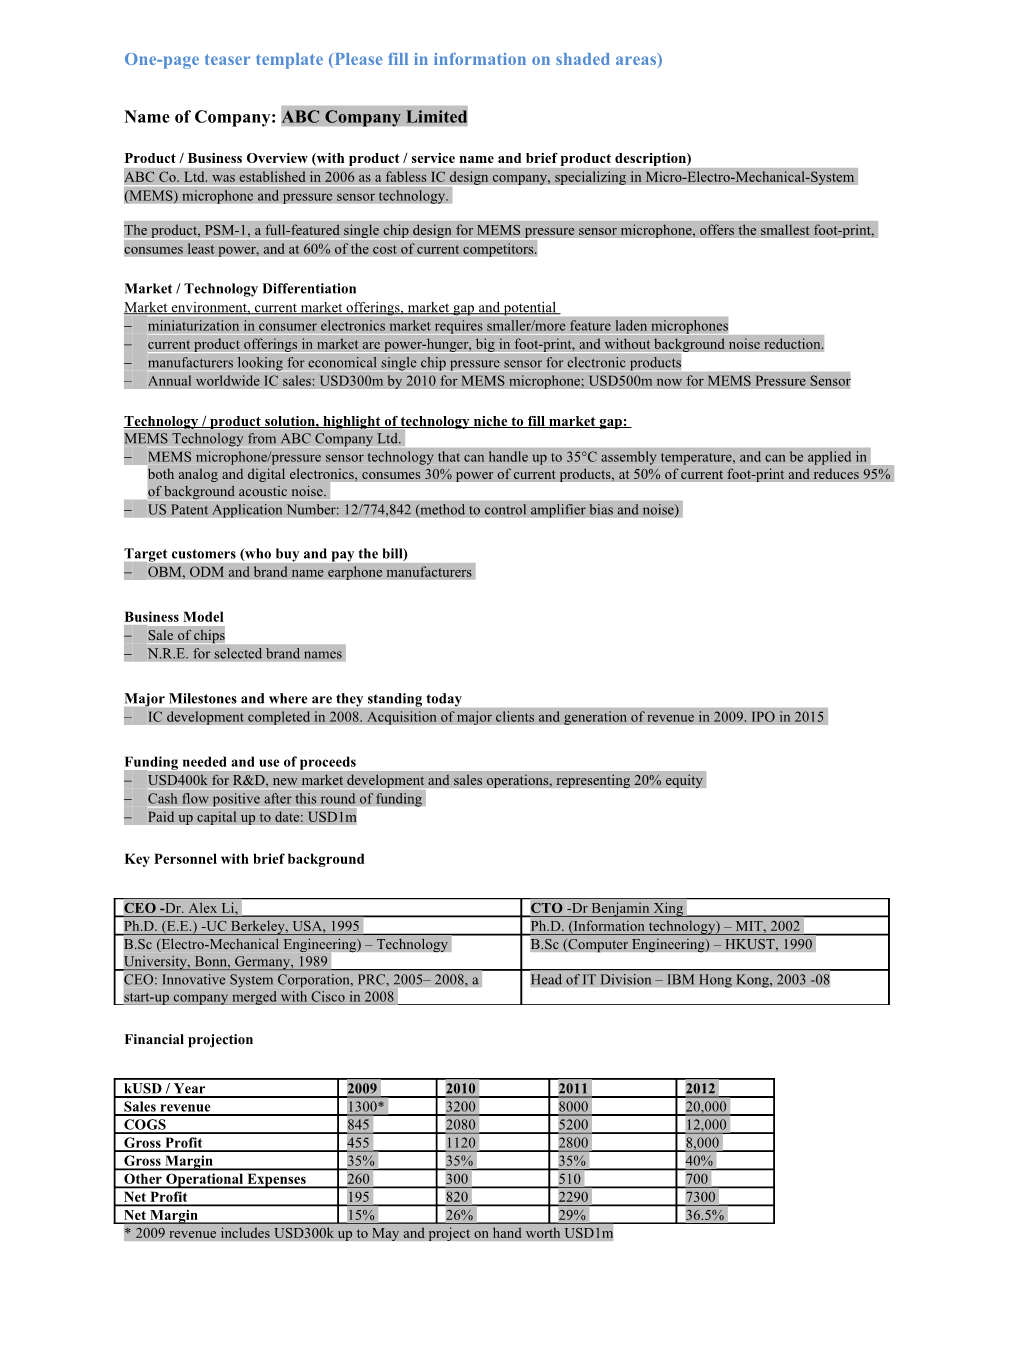 0911 Investment Matching -One-Page-For-VC R6 12-10-10 4